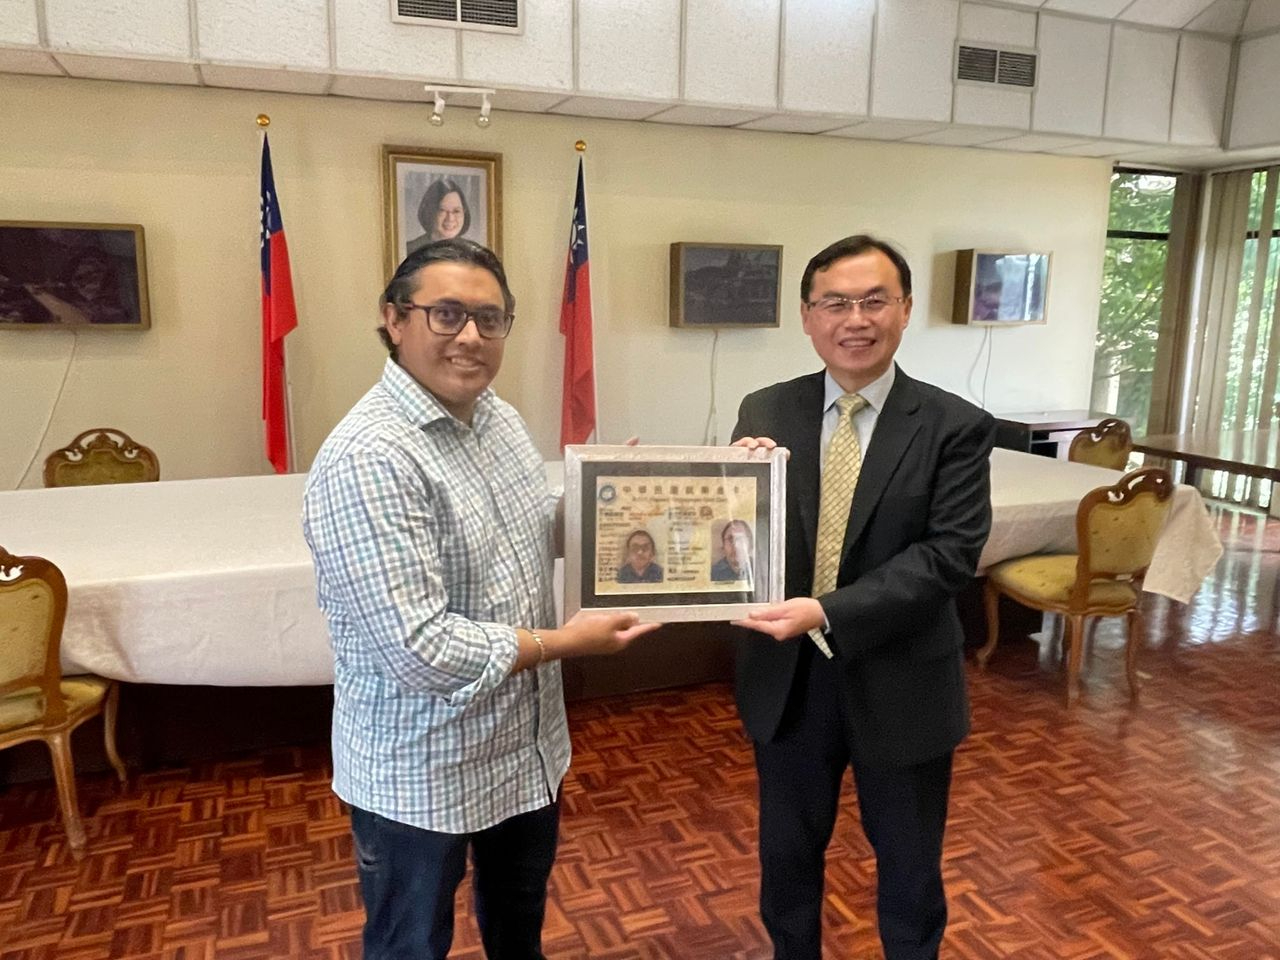 Representative Anthony Ho congratulates Dr. Jean-Paul Solomon on the success of his application for Taiwan Gold Card, and both posed for the photo.